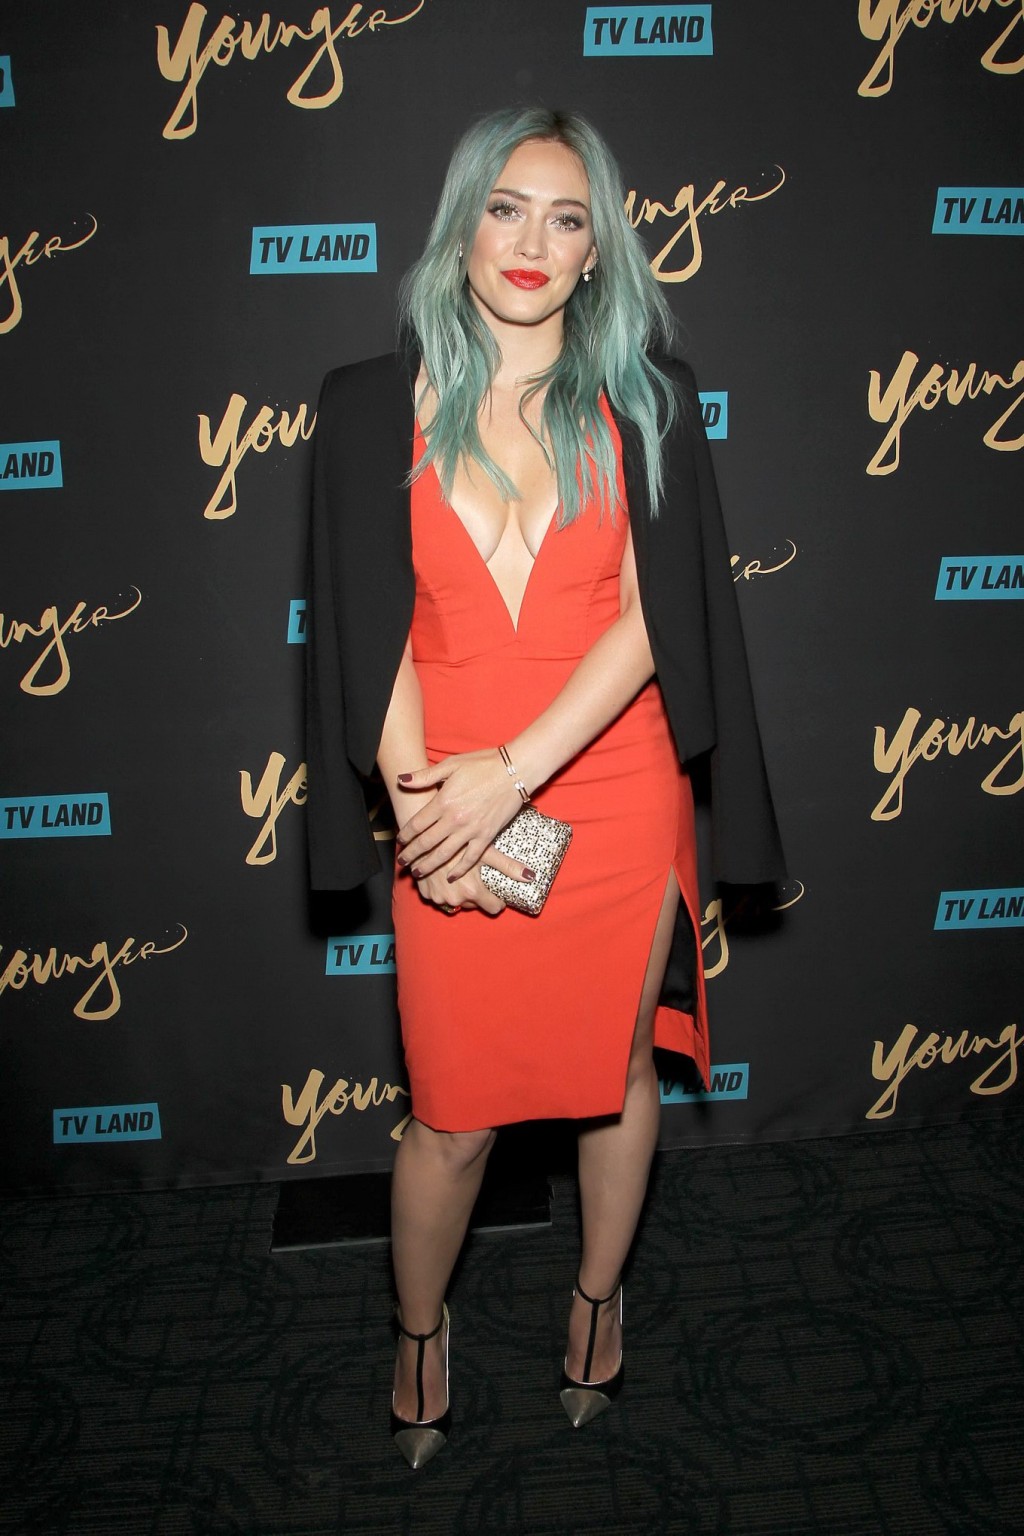 Hilary Duff showing huge cleavage braless in short red dress at the Younger prem #75168382